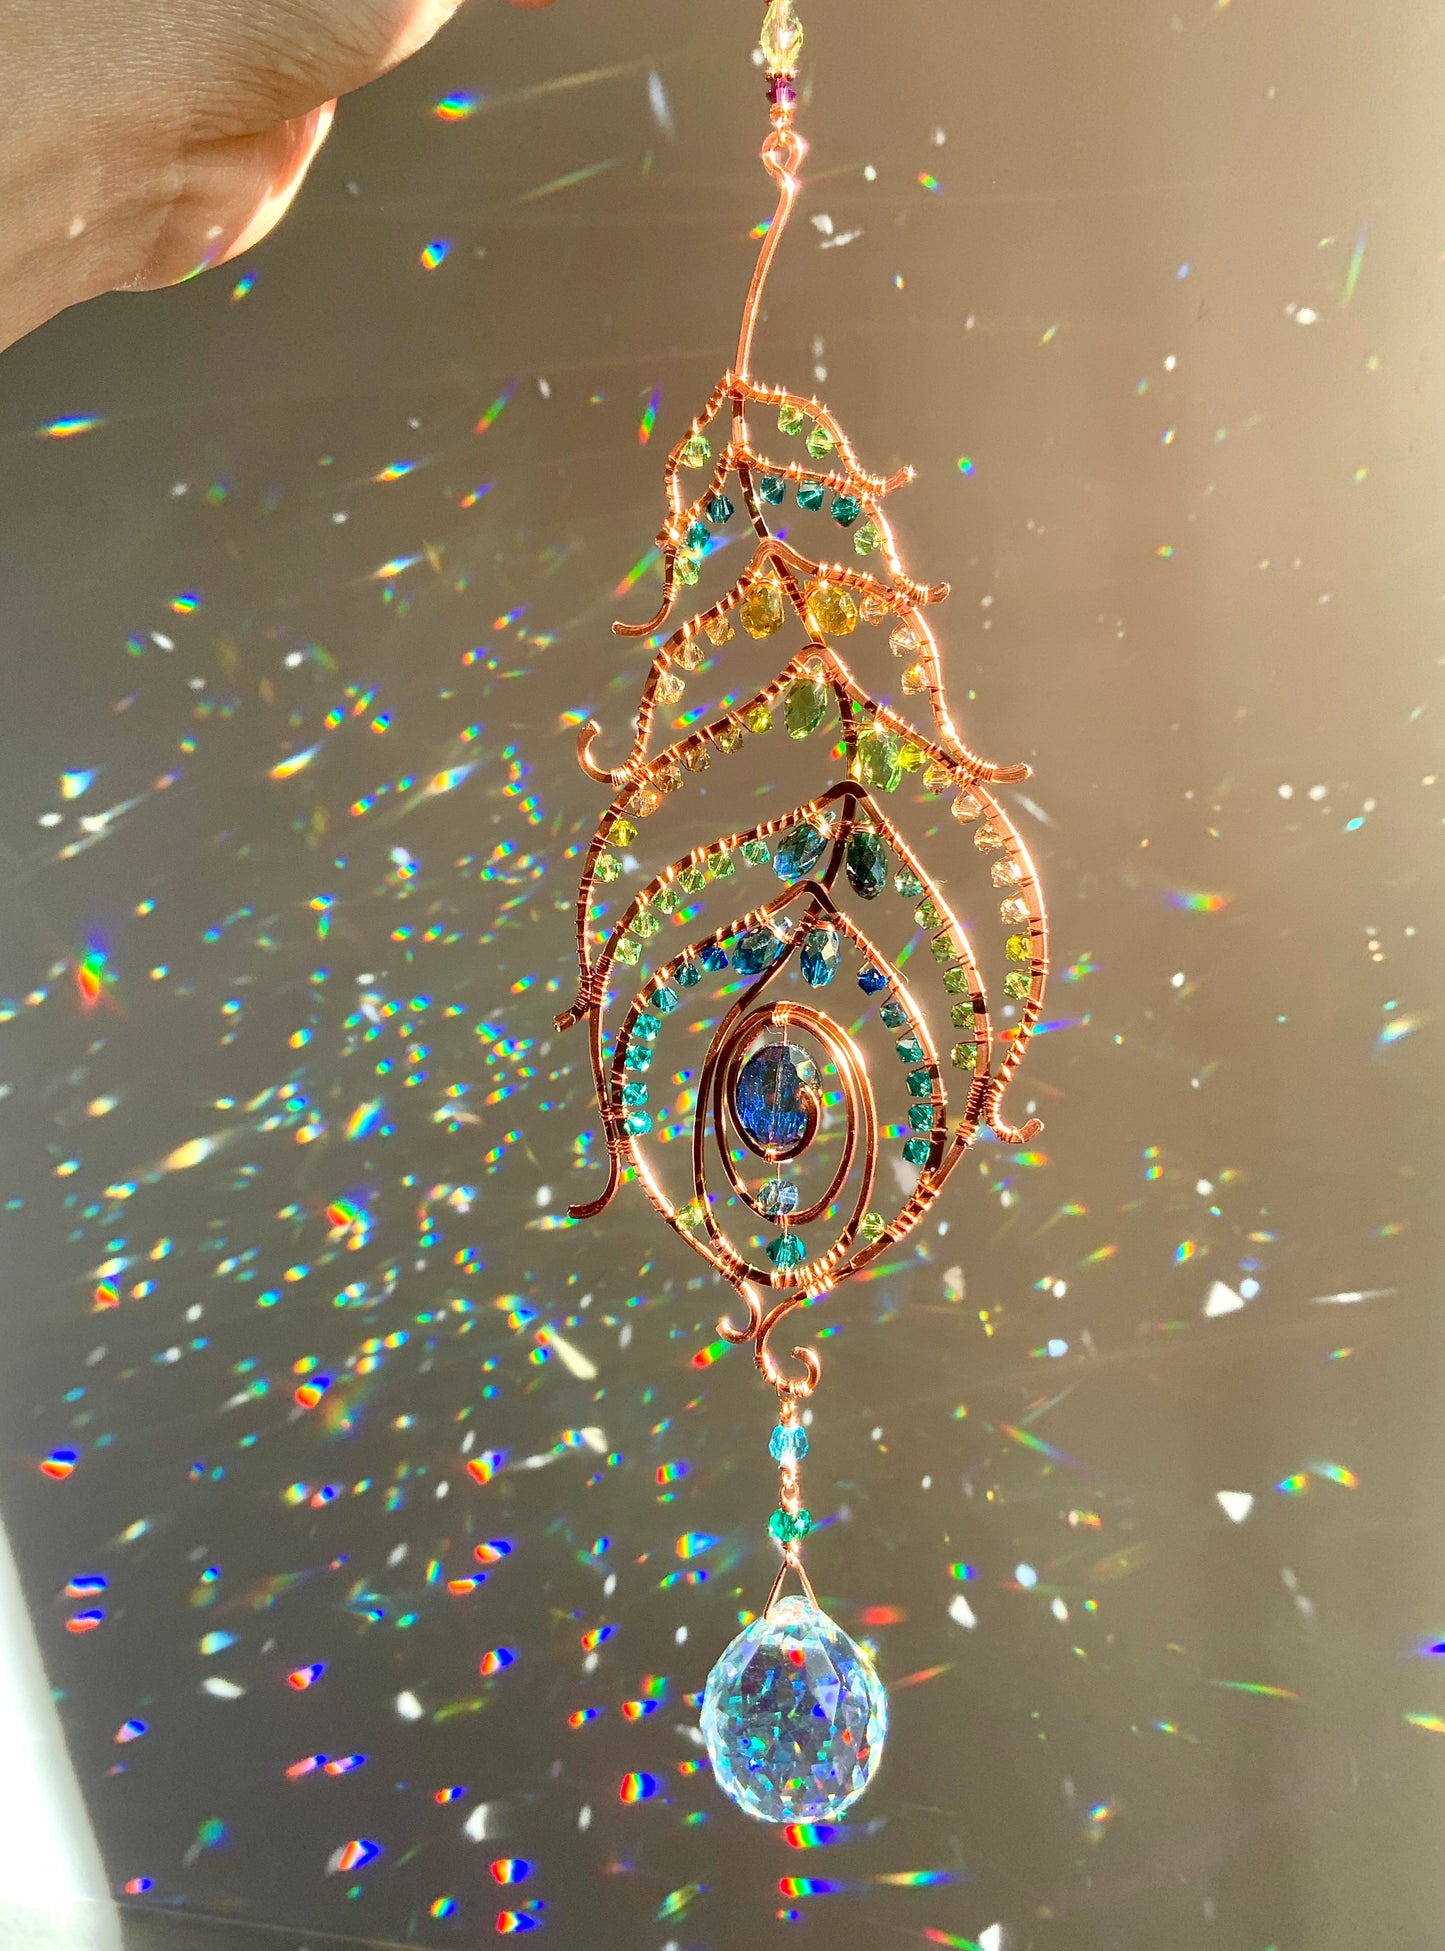 Peacock feather gemstone suncatcher fills the room with sparkles from crystal prism beads